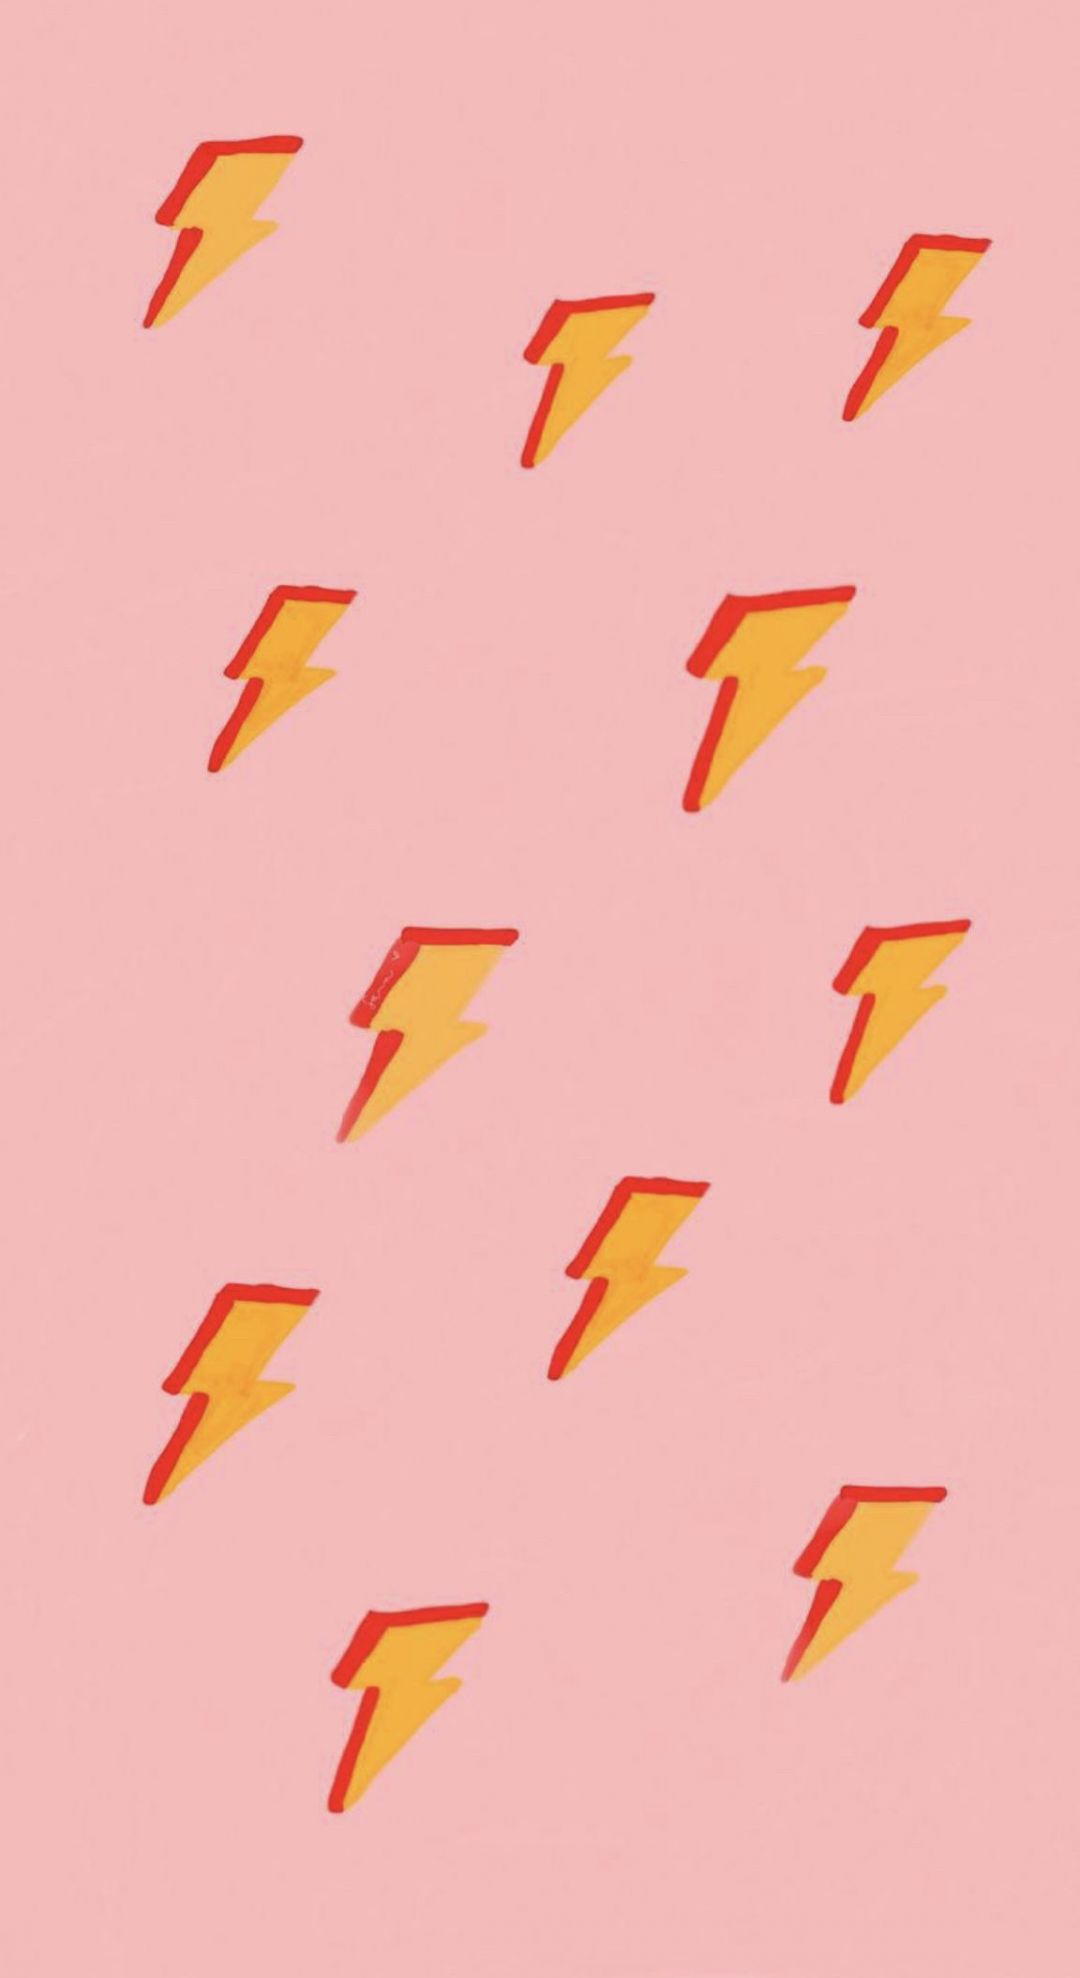 IPhone wallpaper lightning bolt with image resolution 1080x1920 pixel. You can make this wallpaper for your iPhone 5, 6, 7, 8, X backgrounds, Mobile Screensaver, or iPad Lock Screen - Pattern